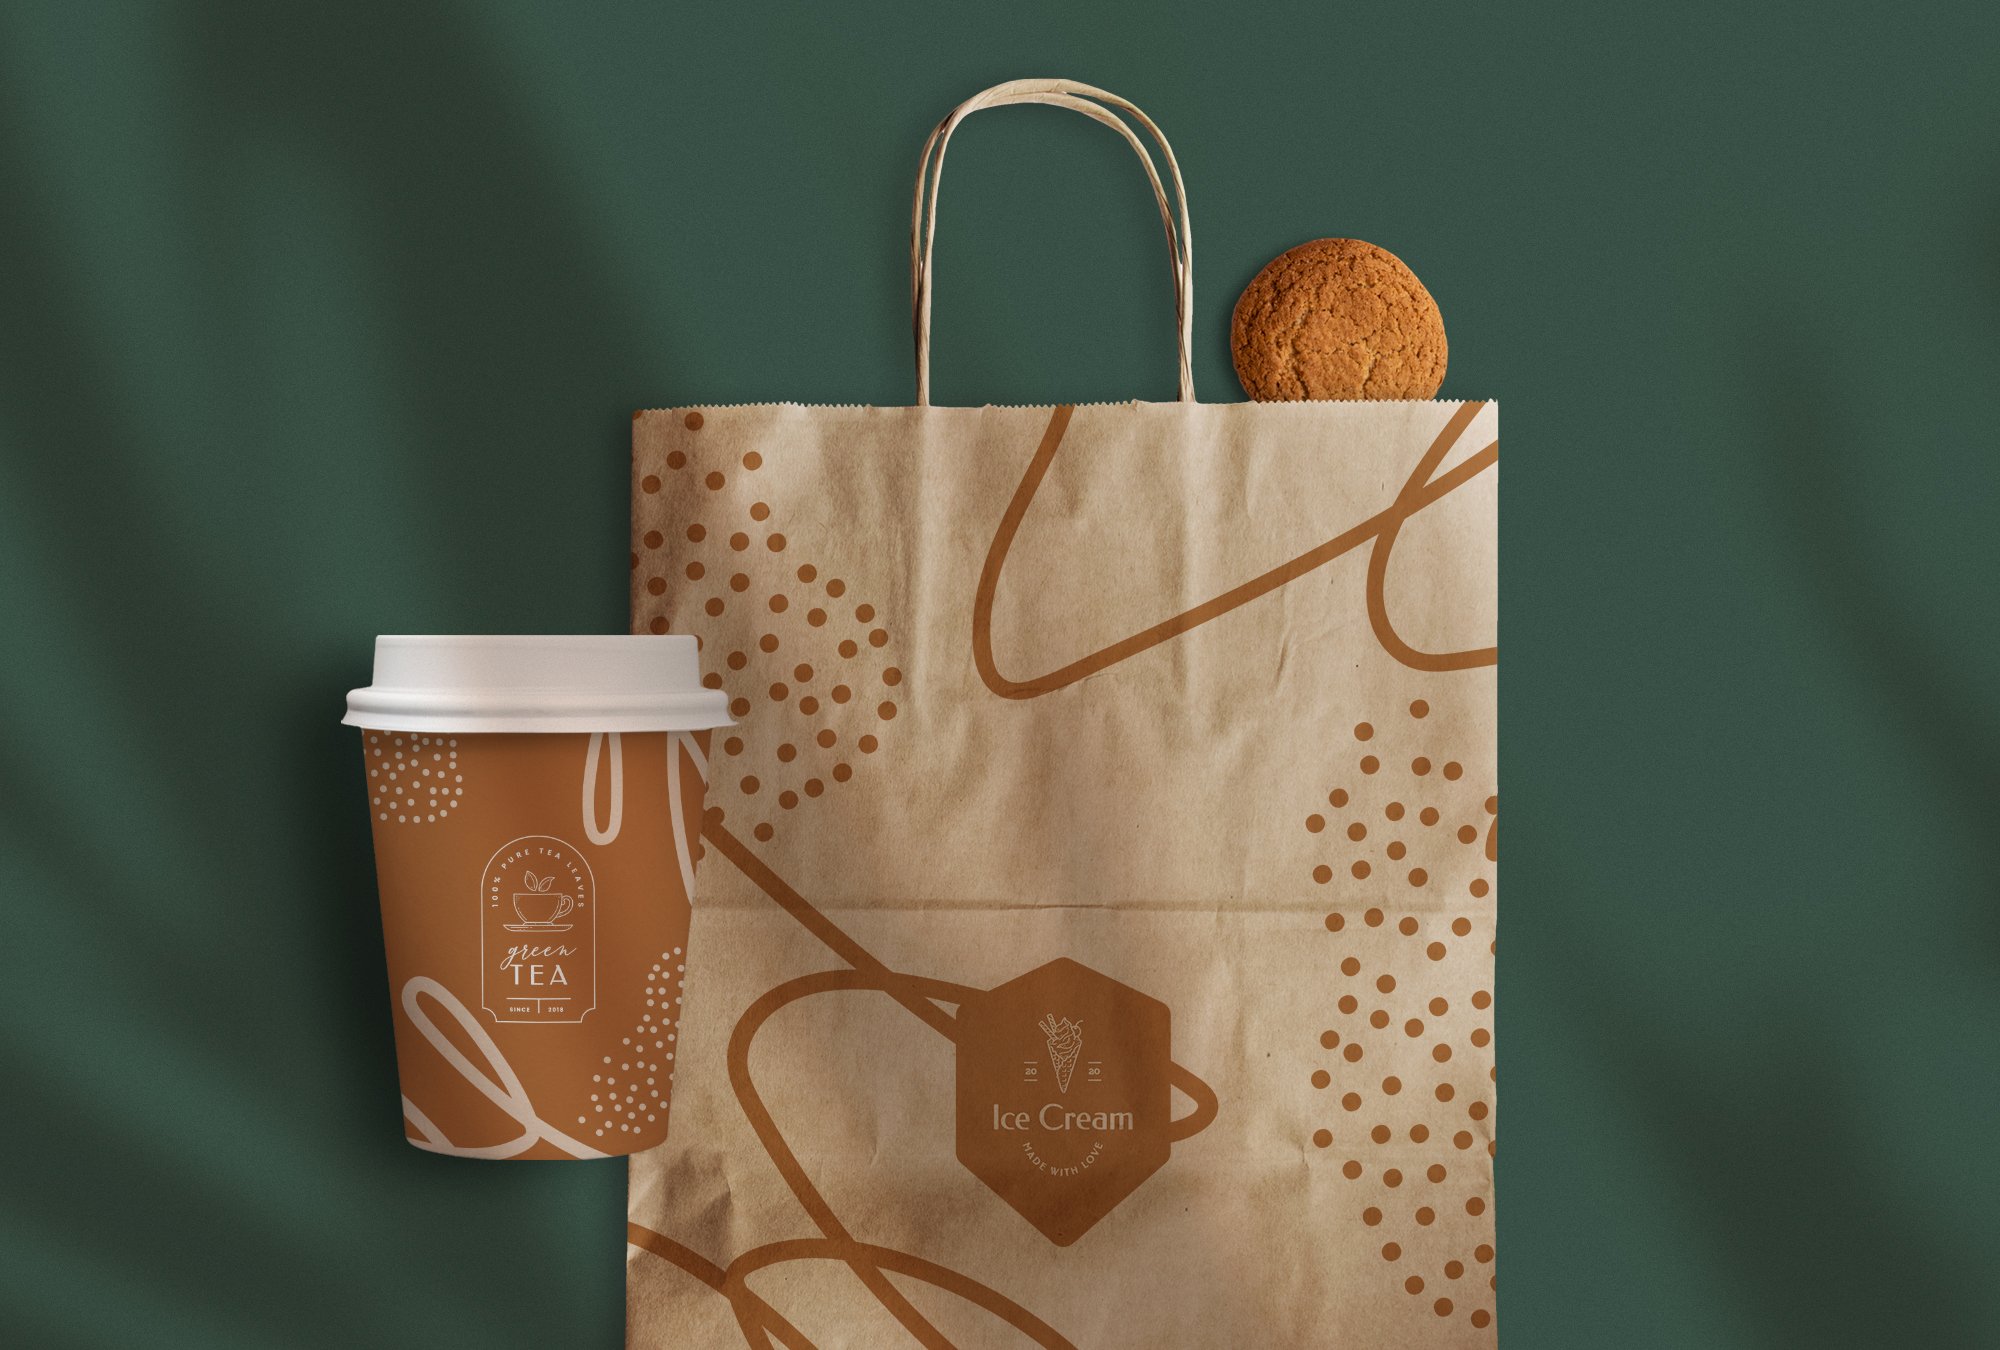 Previews of logos on the coffee cup and craft package.